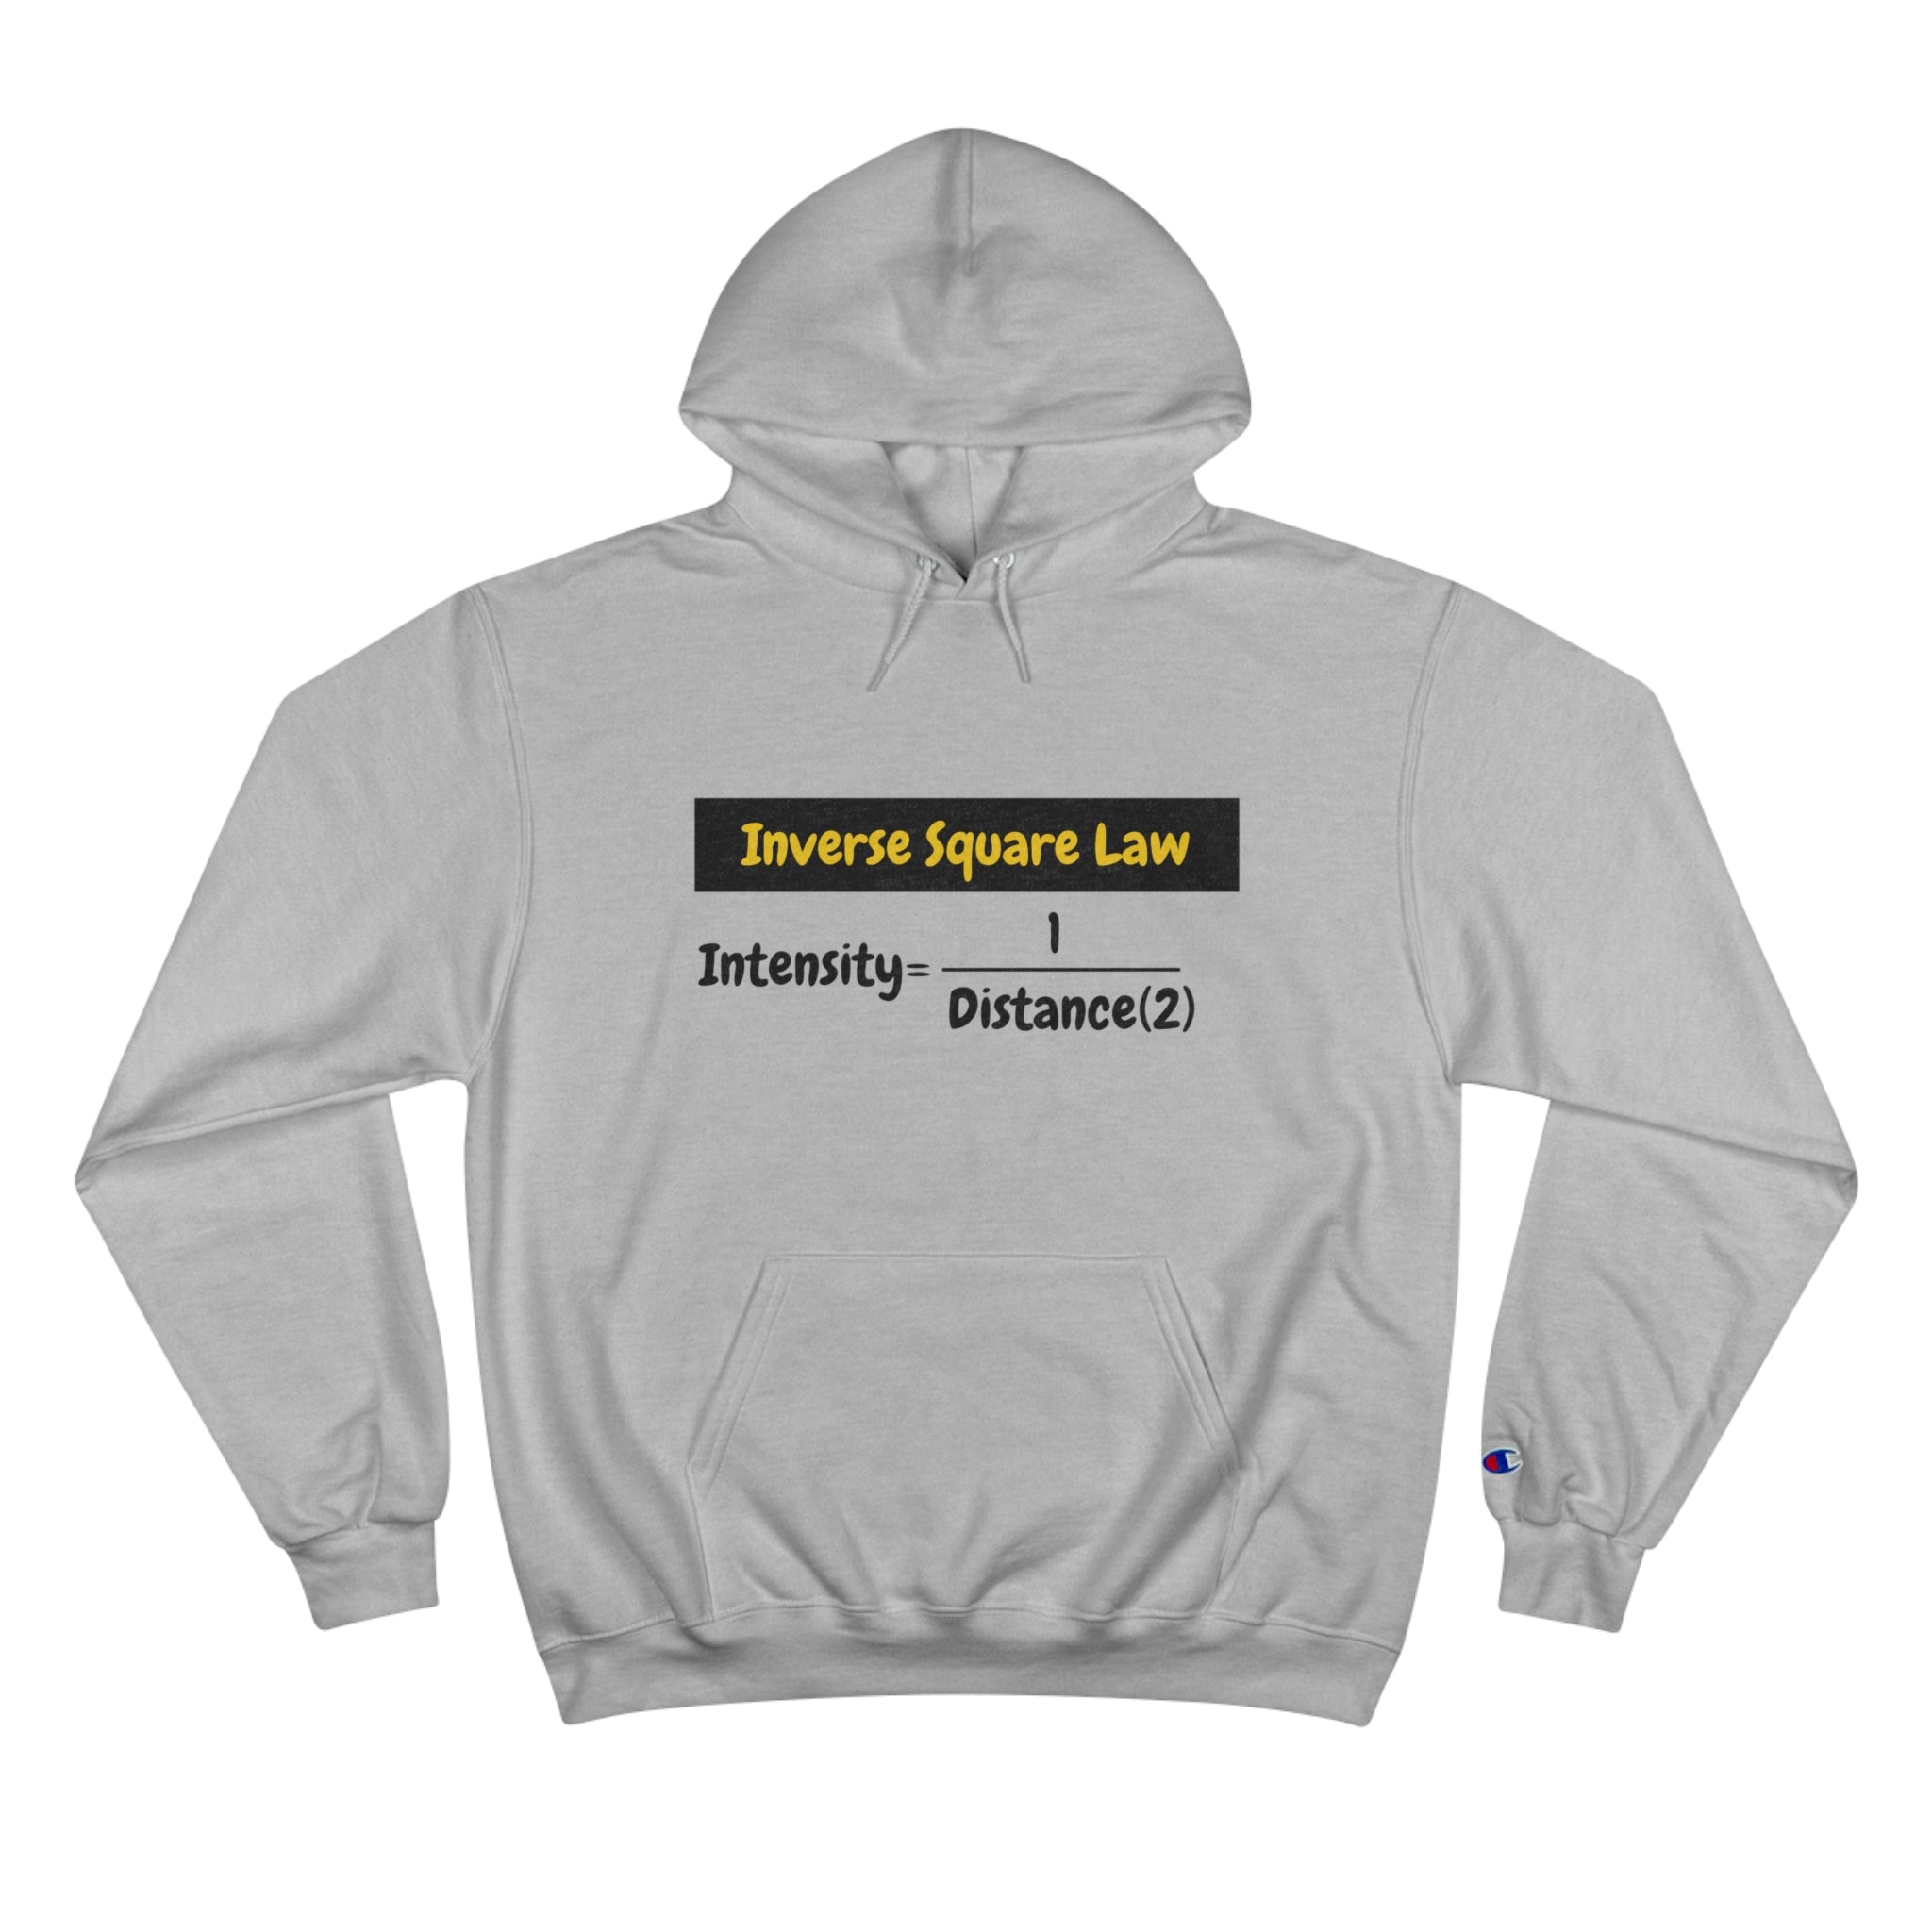 Inverse Square Law Champion Hoodie for Photographers